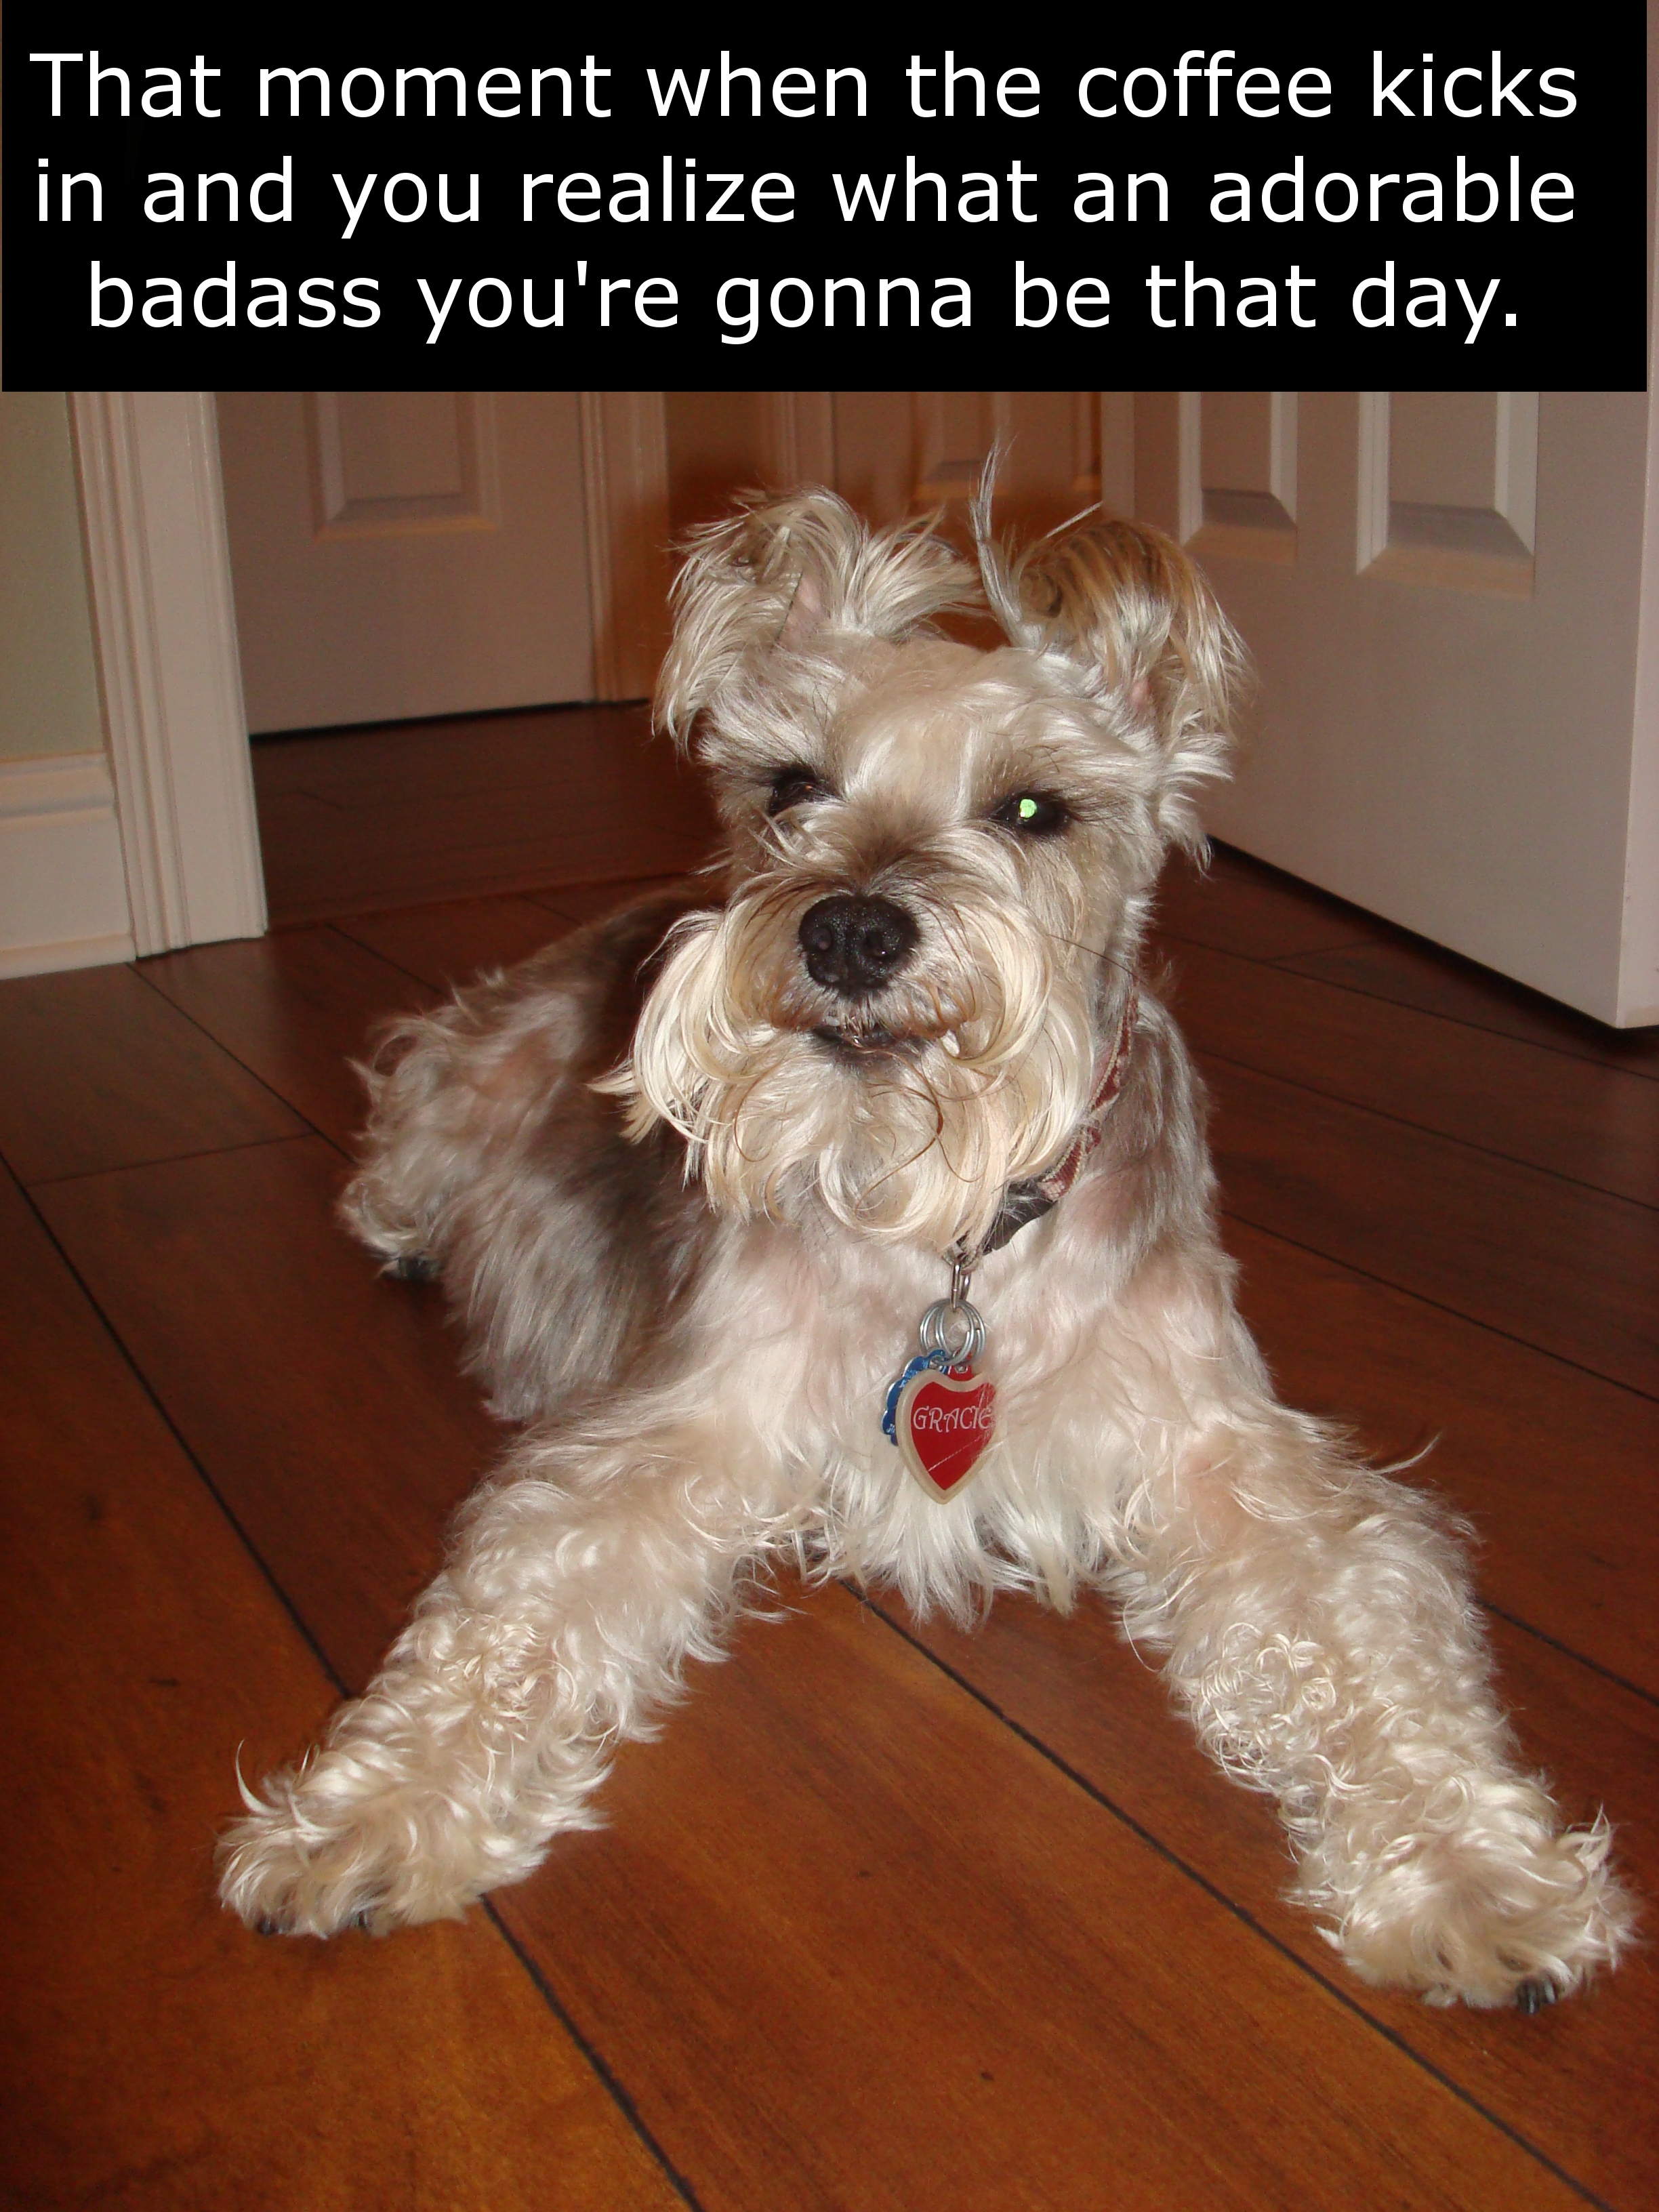 miniature schnauzer - That moment when the coffee kicks in and you realize what an adorable badass you're gonna be that day.